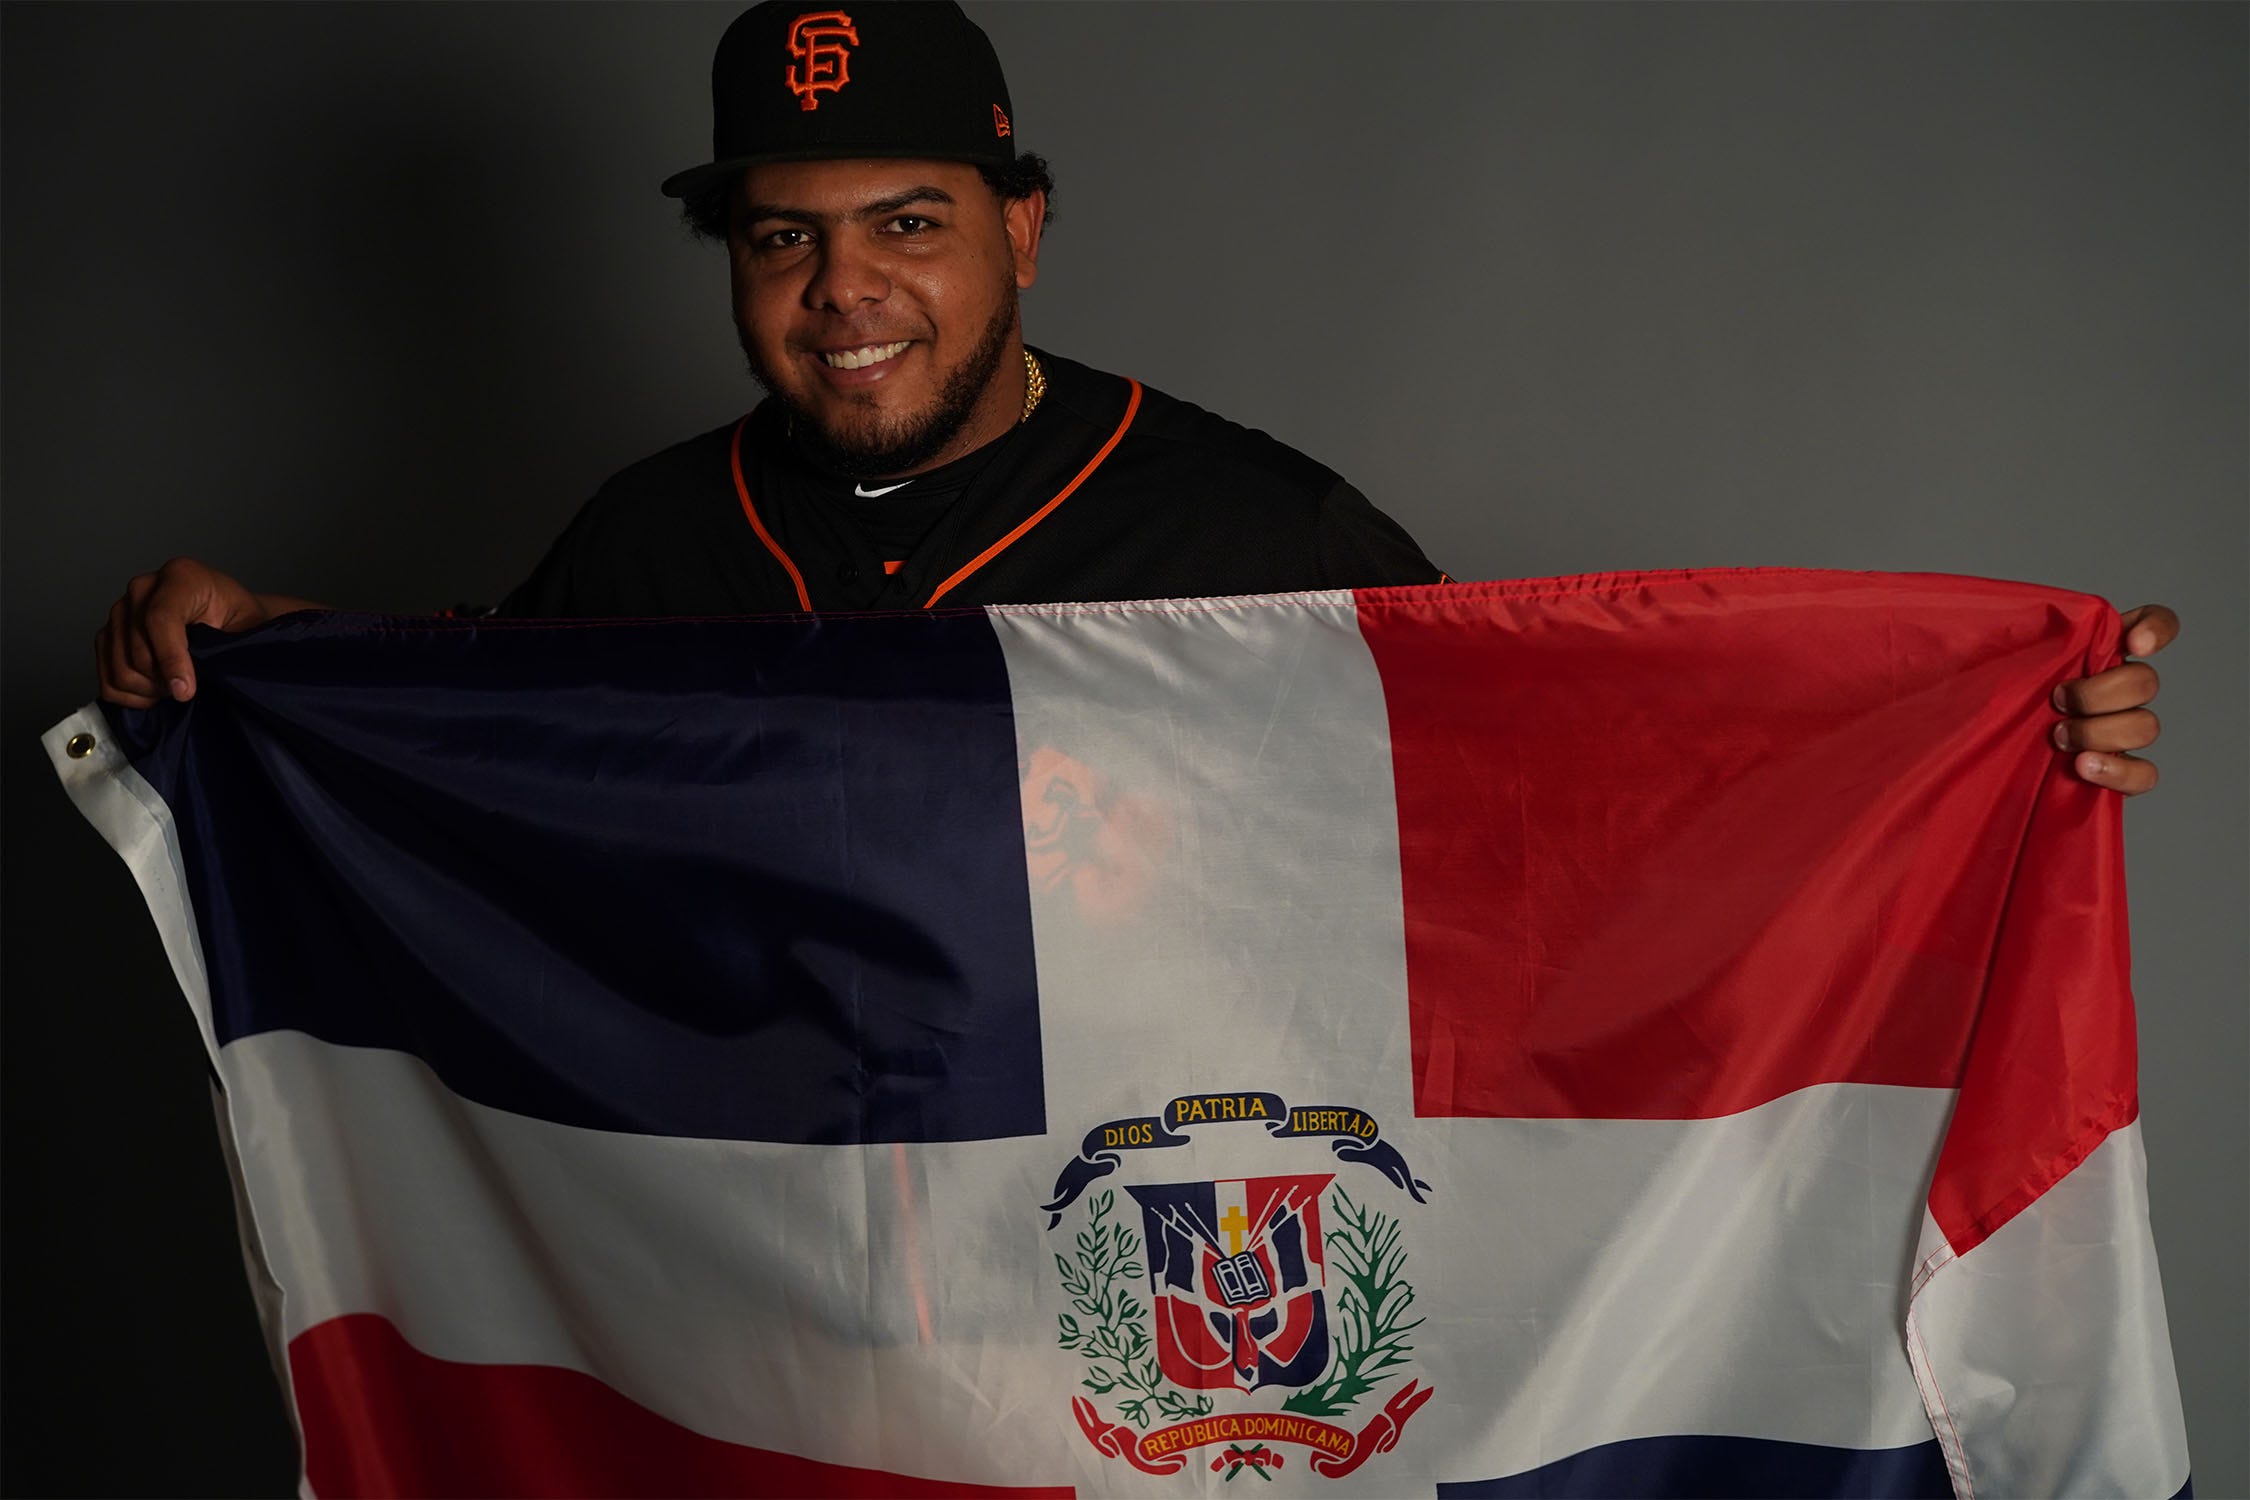 Viva Los Gigantes!. Every September during Fiesta Gigantes…, by San  Francisco Giants